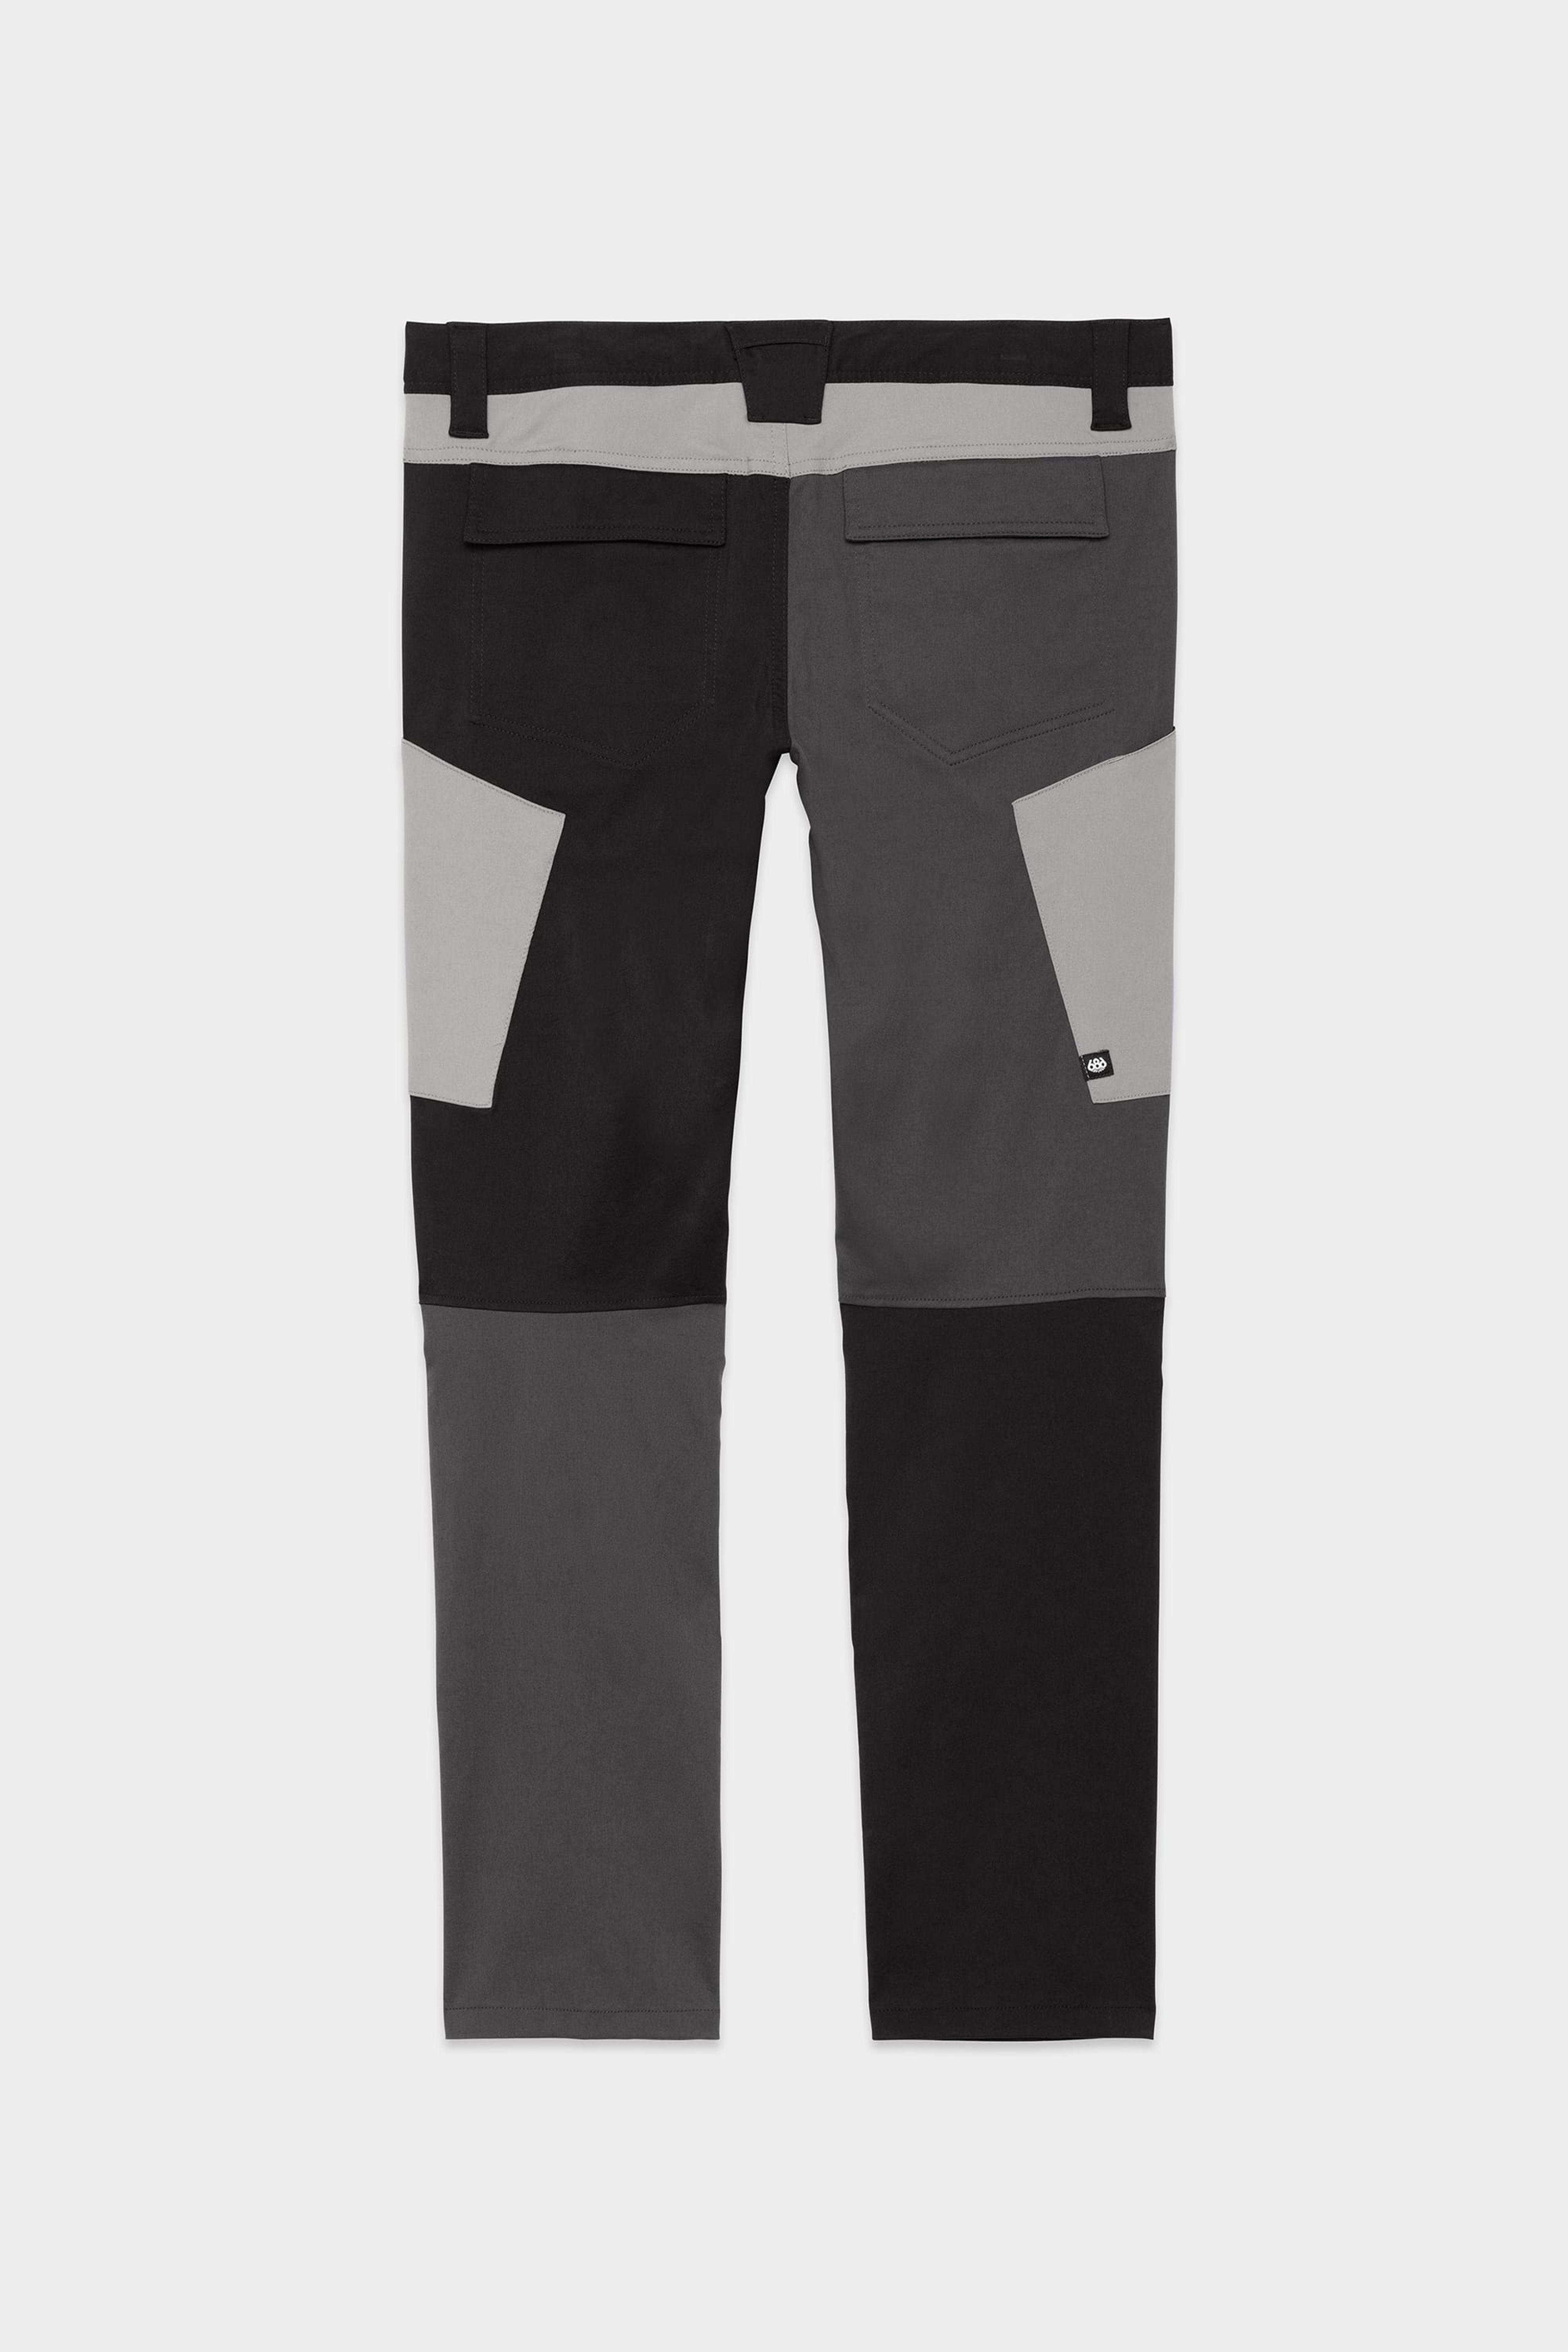 Alternate View 39 of 686 Men's Anything Cargo Pant - Slim Fit